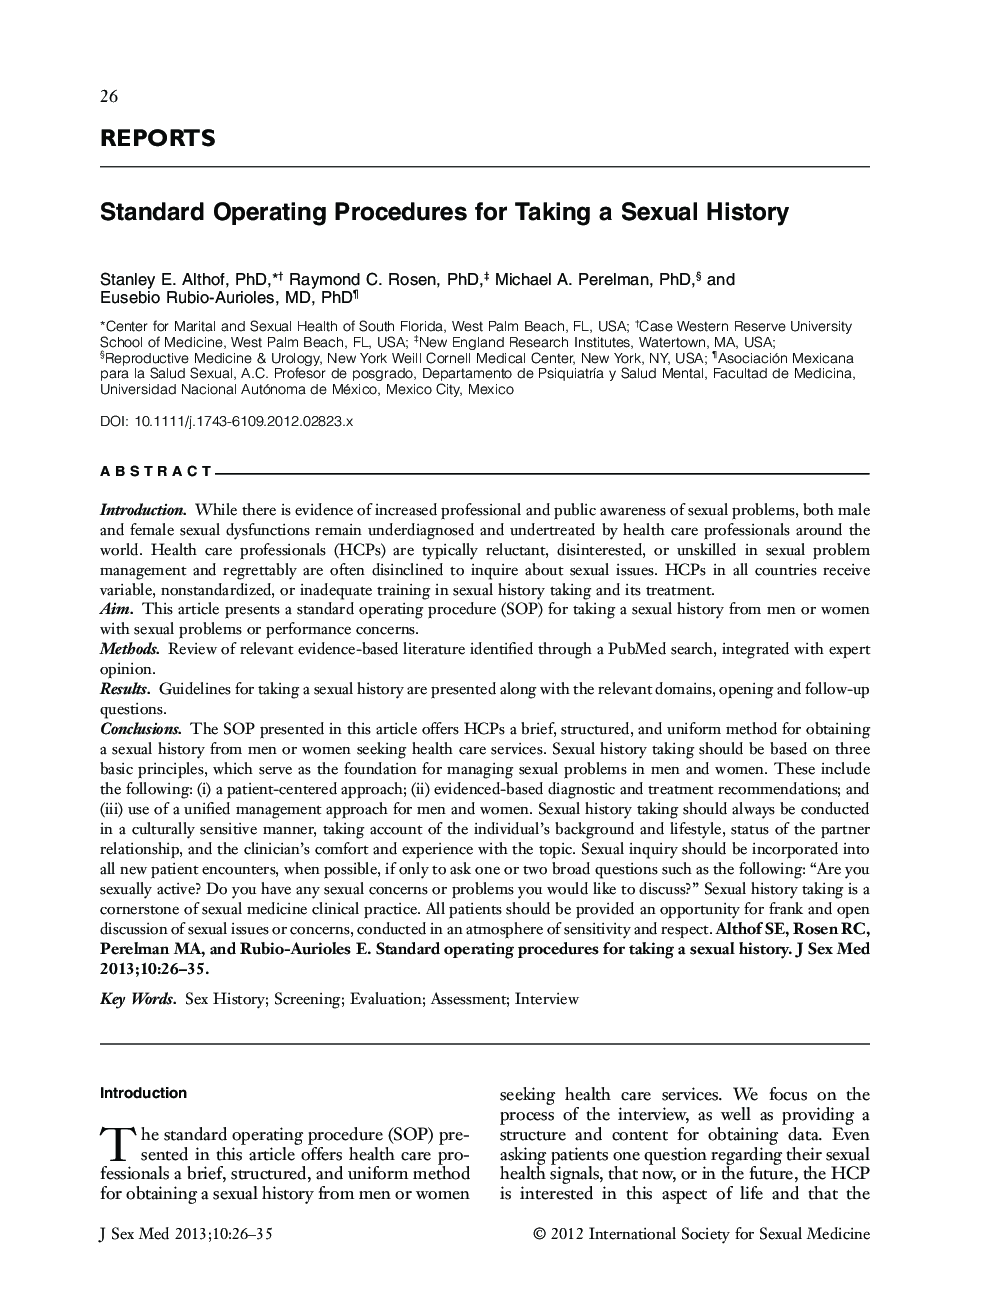 Standard Operating Procedures for Taking a Sexual History